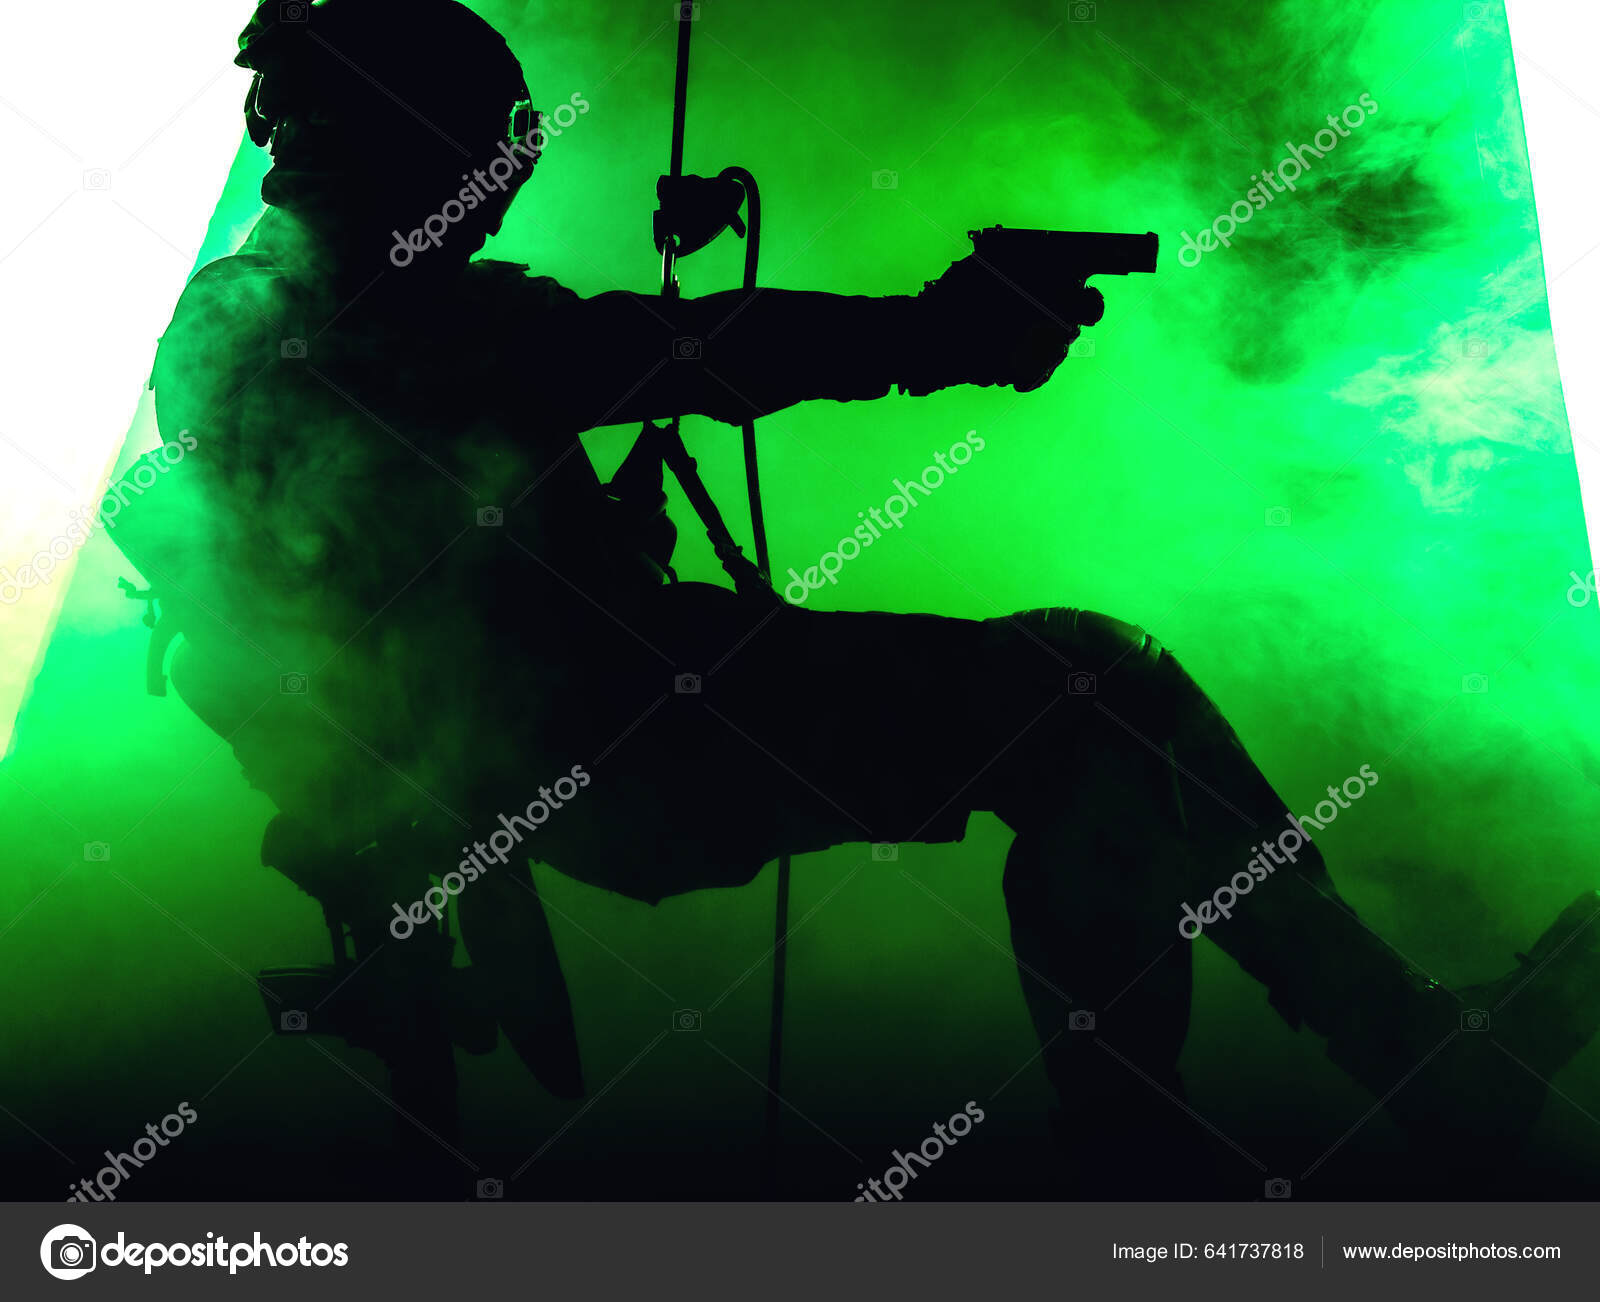 Silhouette Police Officer Tactical Gear Descending Height Rope Exercises  Weapons Stock Photo by ©zabelin 641737818